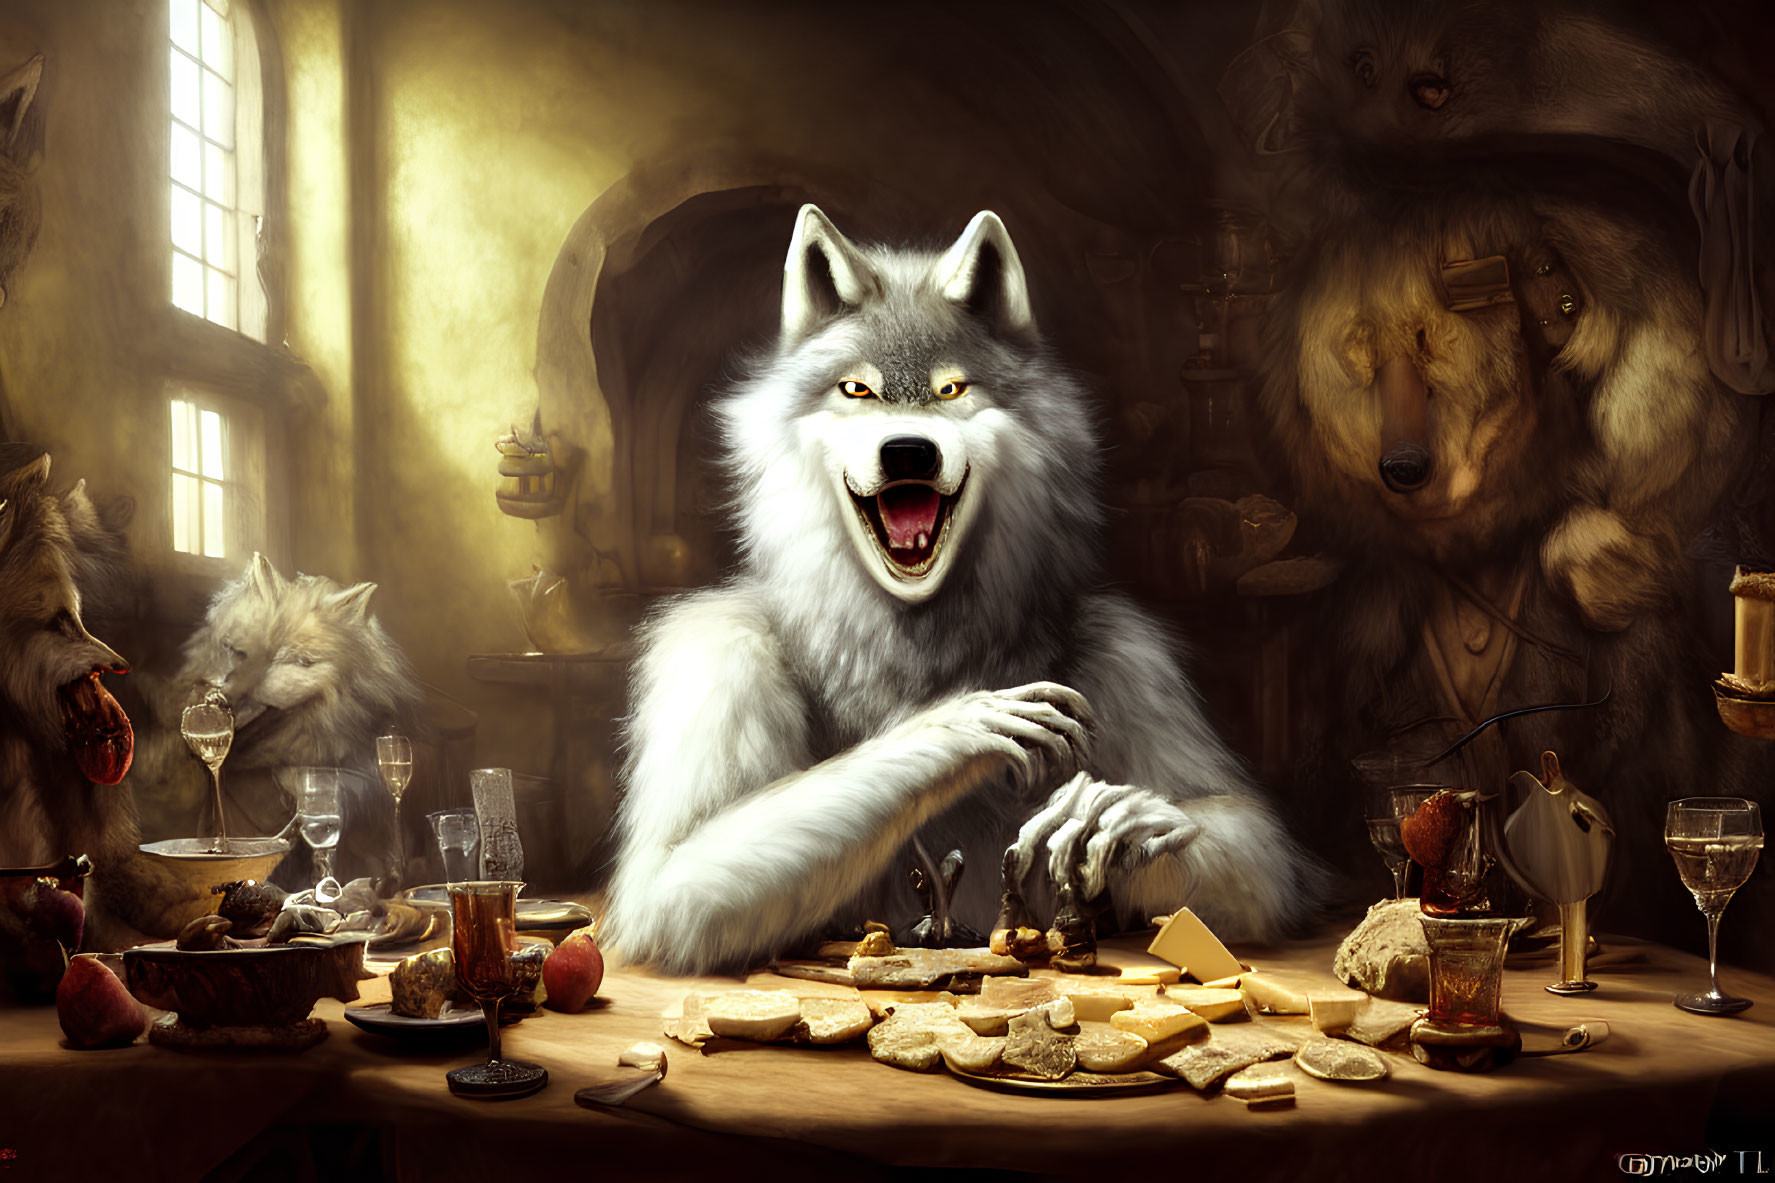 Anthropomorphic wolf with blue eyes at medieval feast table